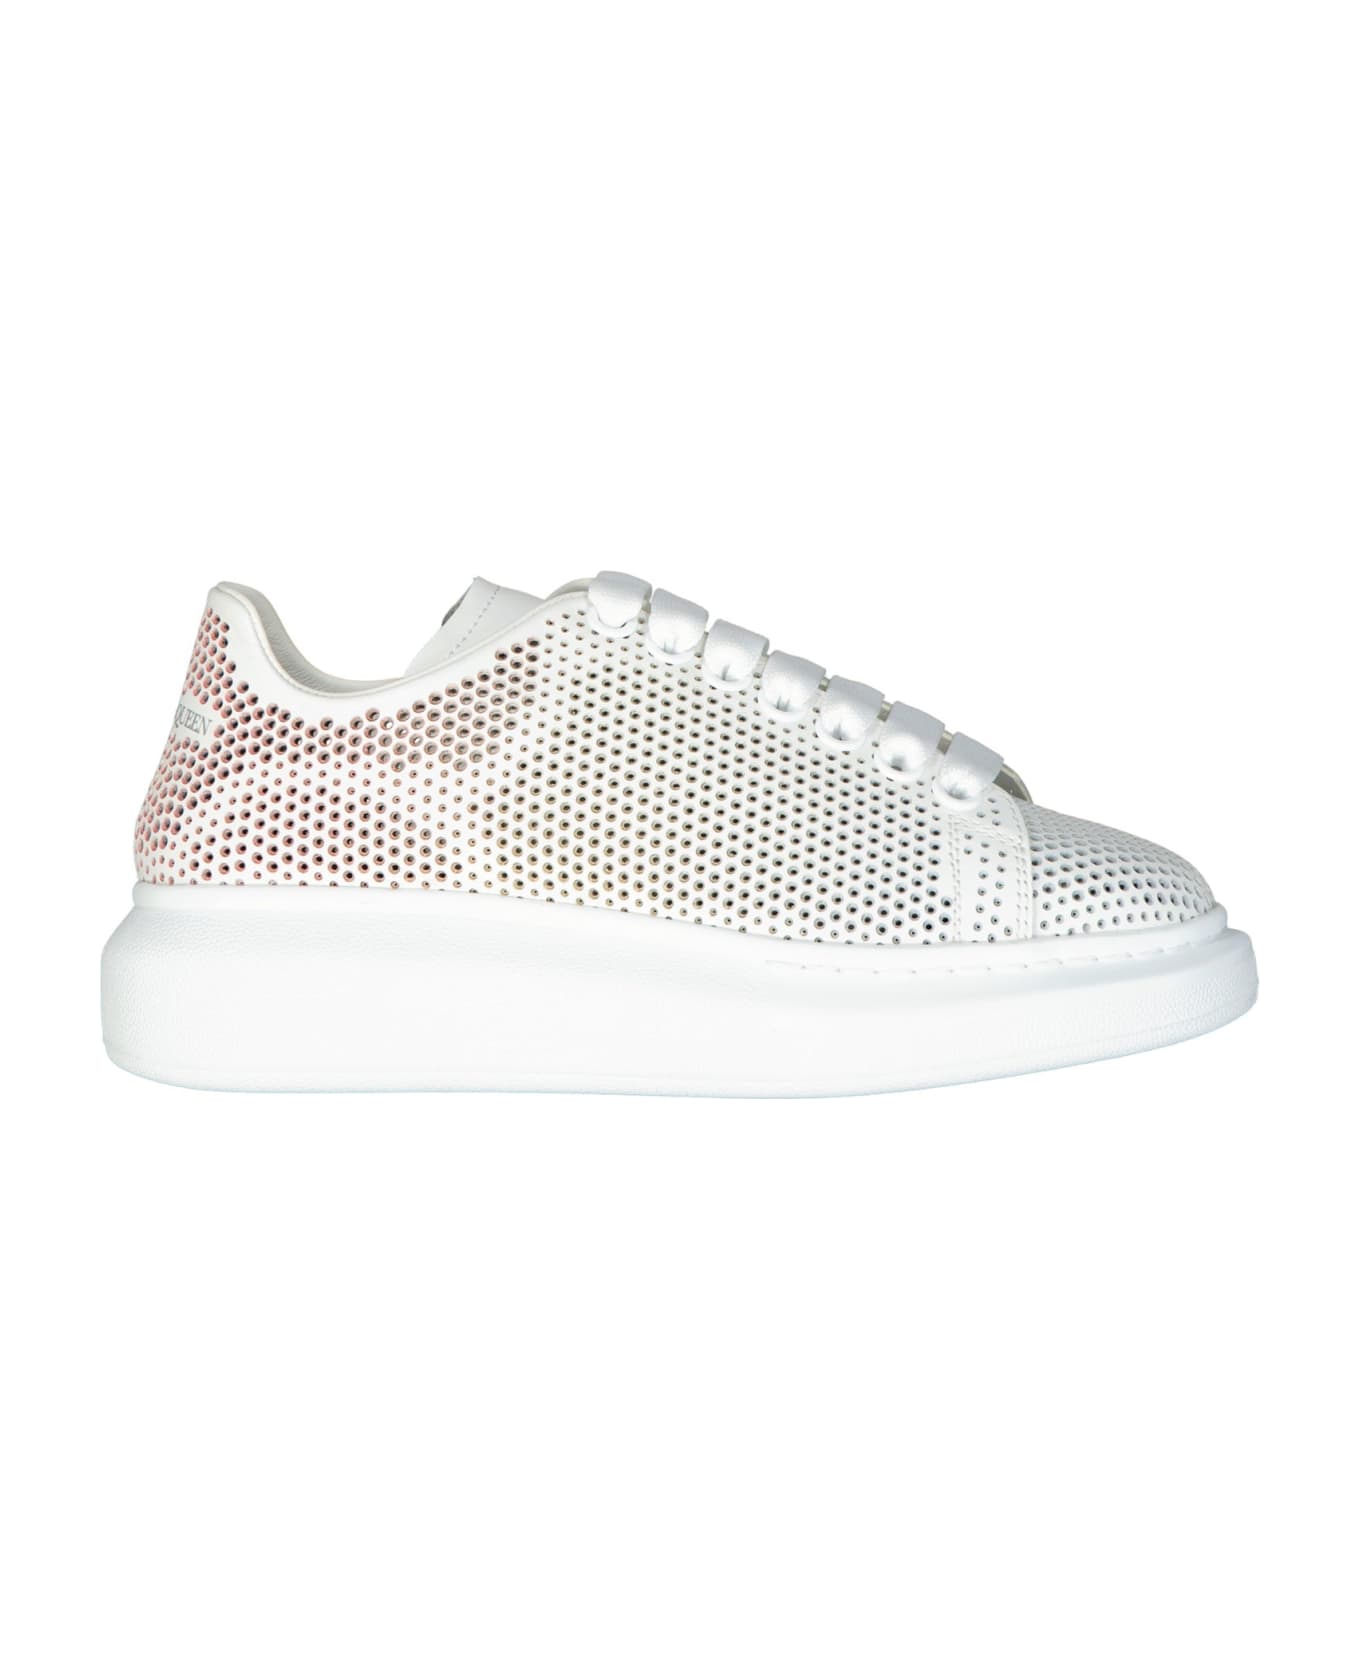 Alexander McQueen Oversized Dotted Cut-out Sneakers - White スニーカー